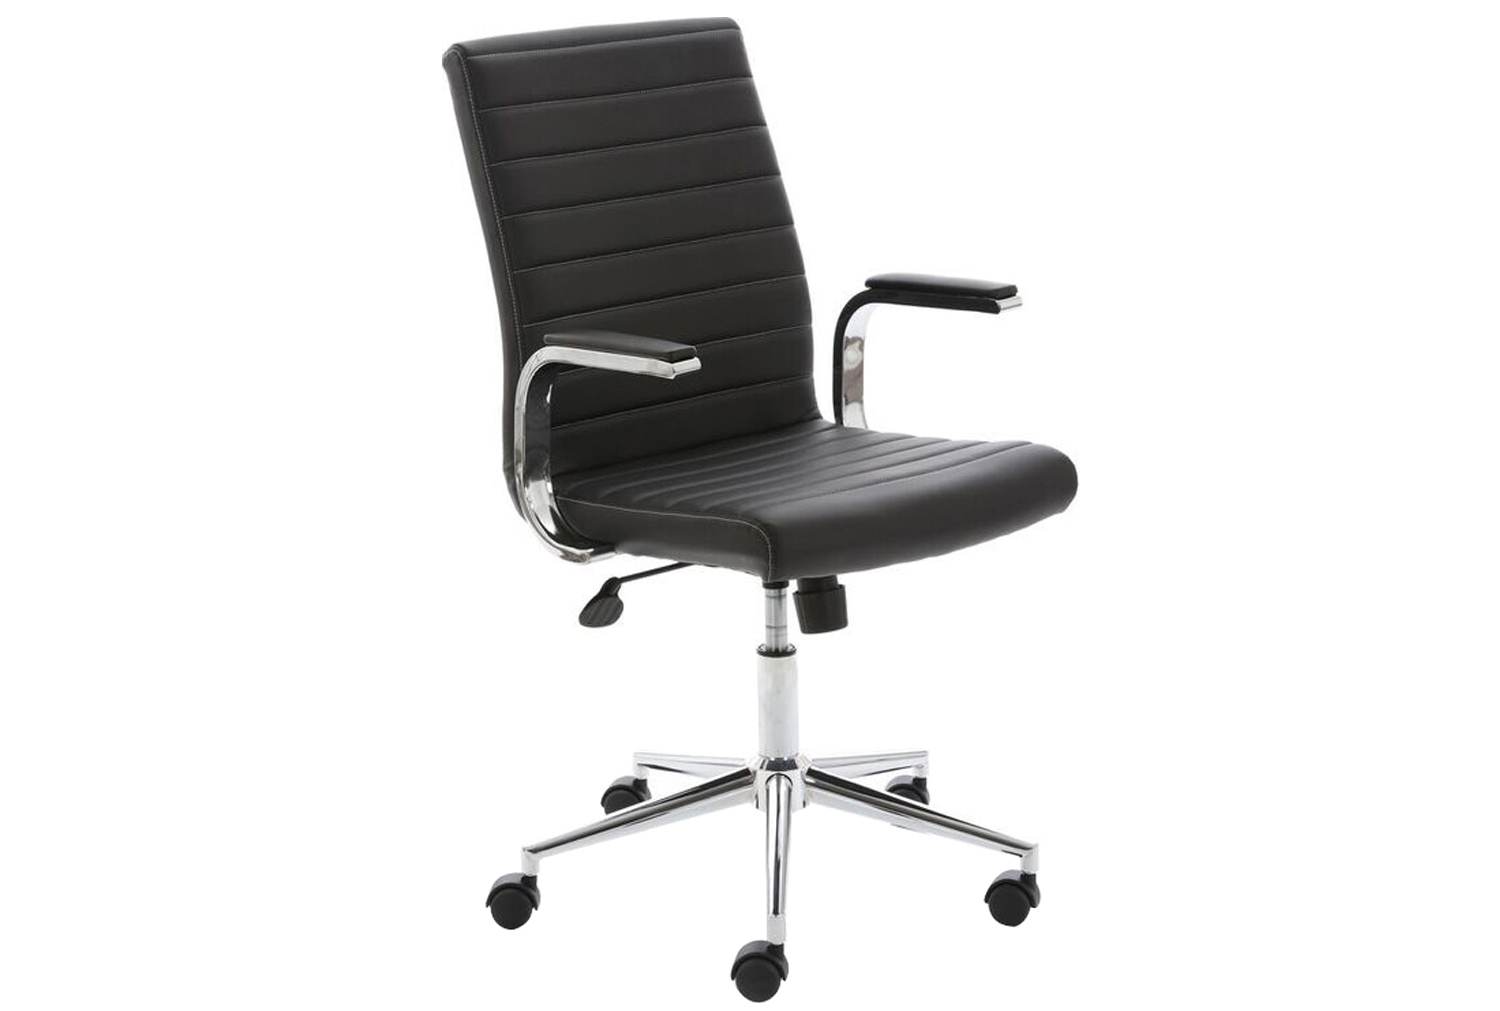 Wexford Executive Bonded Leather Office Chair (Black)